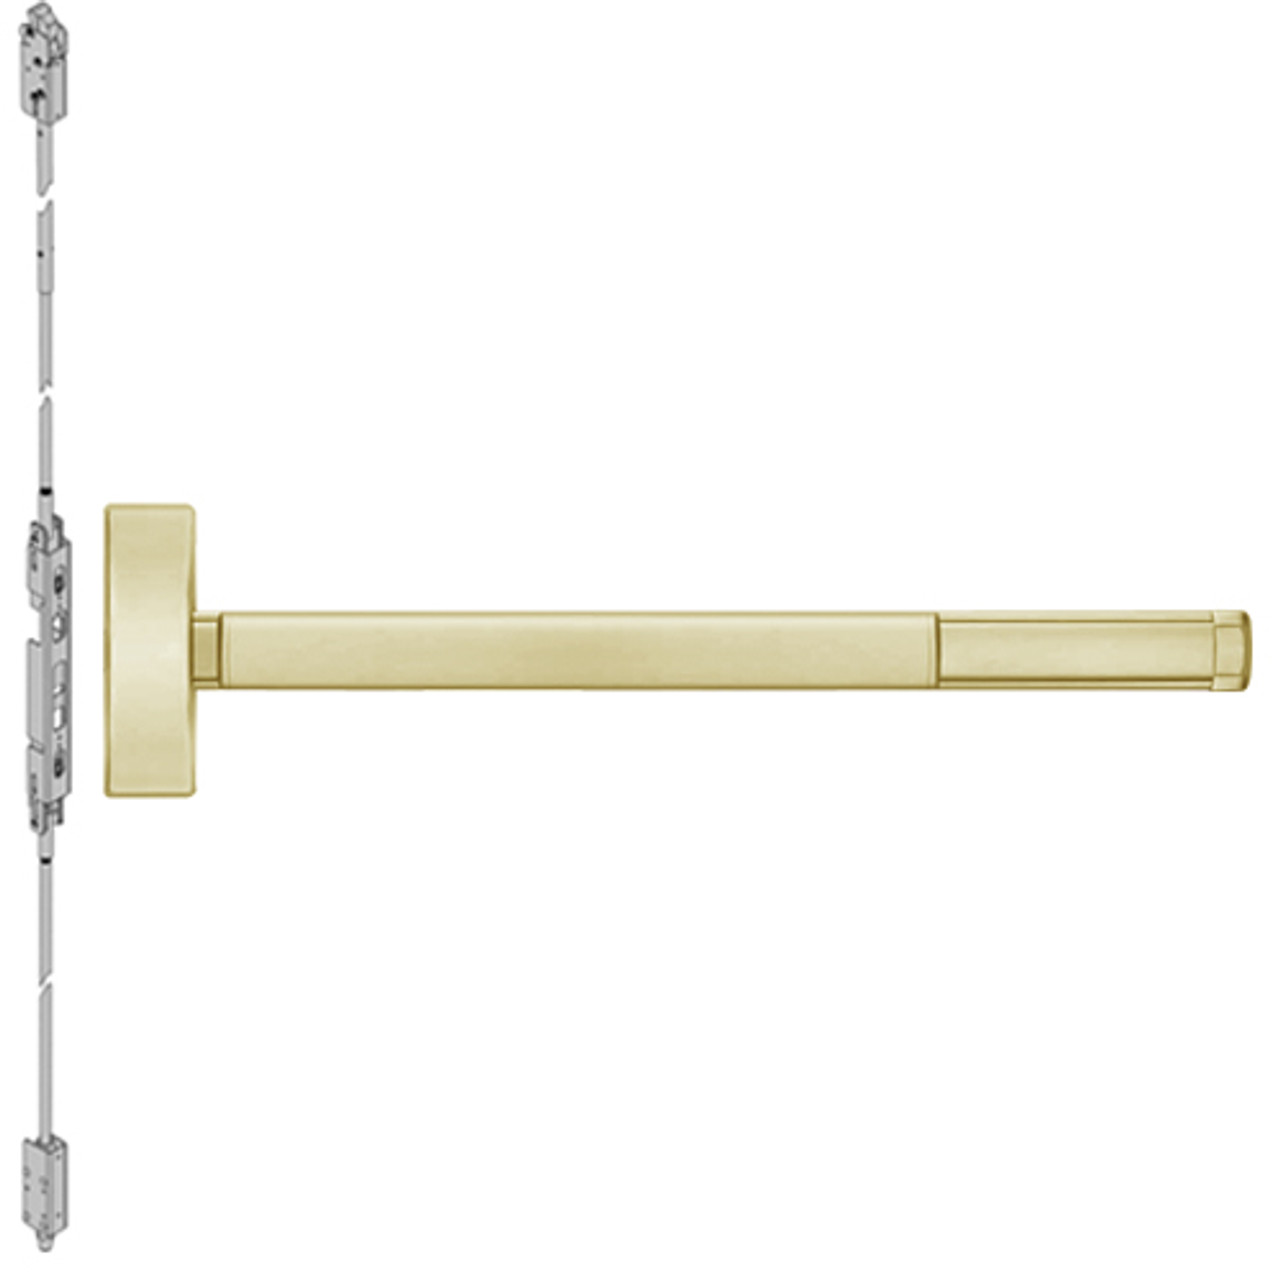 FL2808-606-36 PHI 2800 Series Fire Rated Concealed Vertical Rod Exit Device Prepped for Key Controls Lever-Knob in Satin Brass Finish